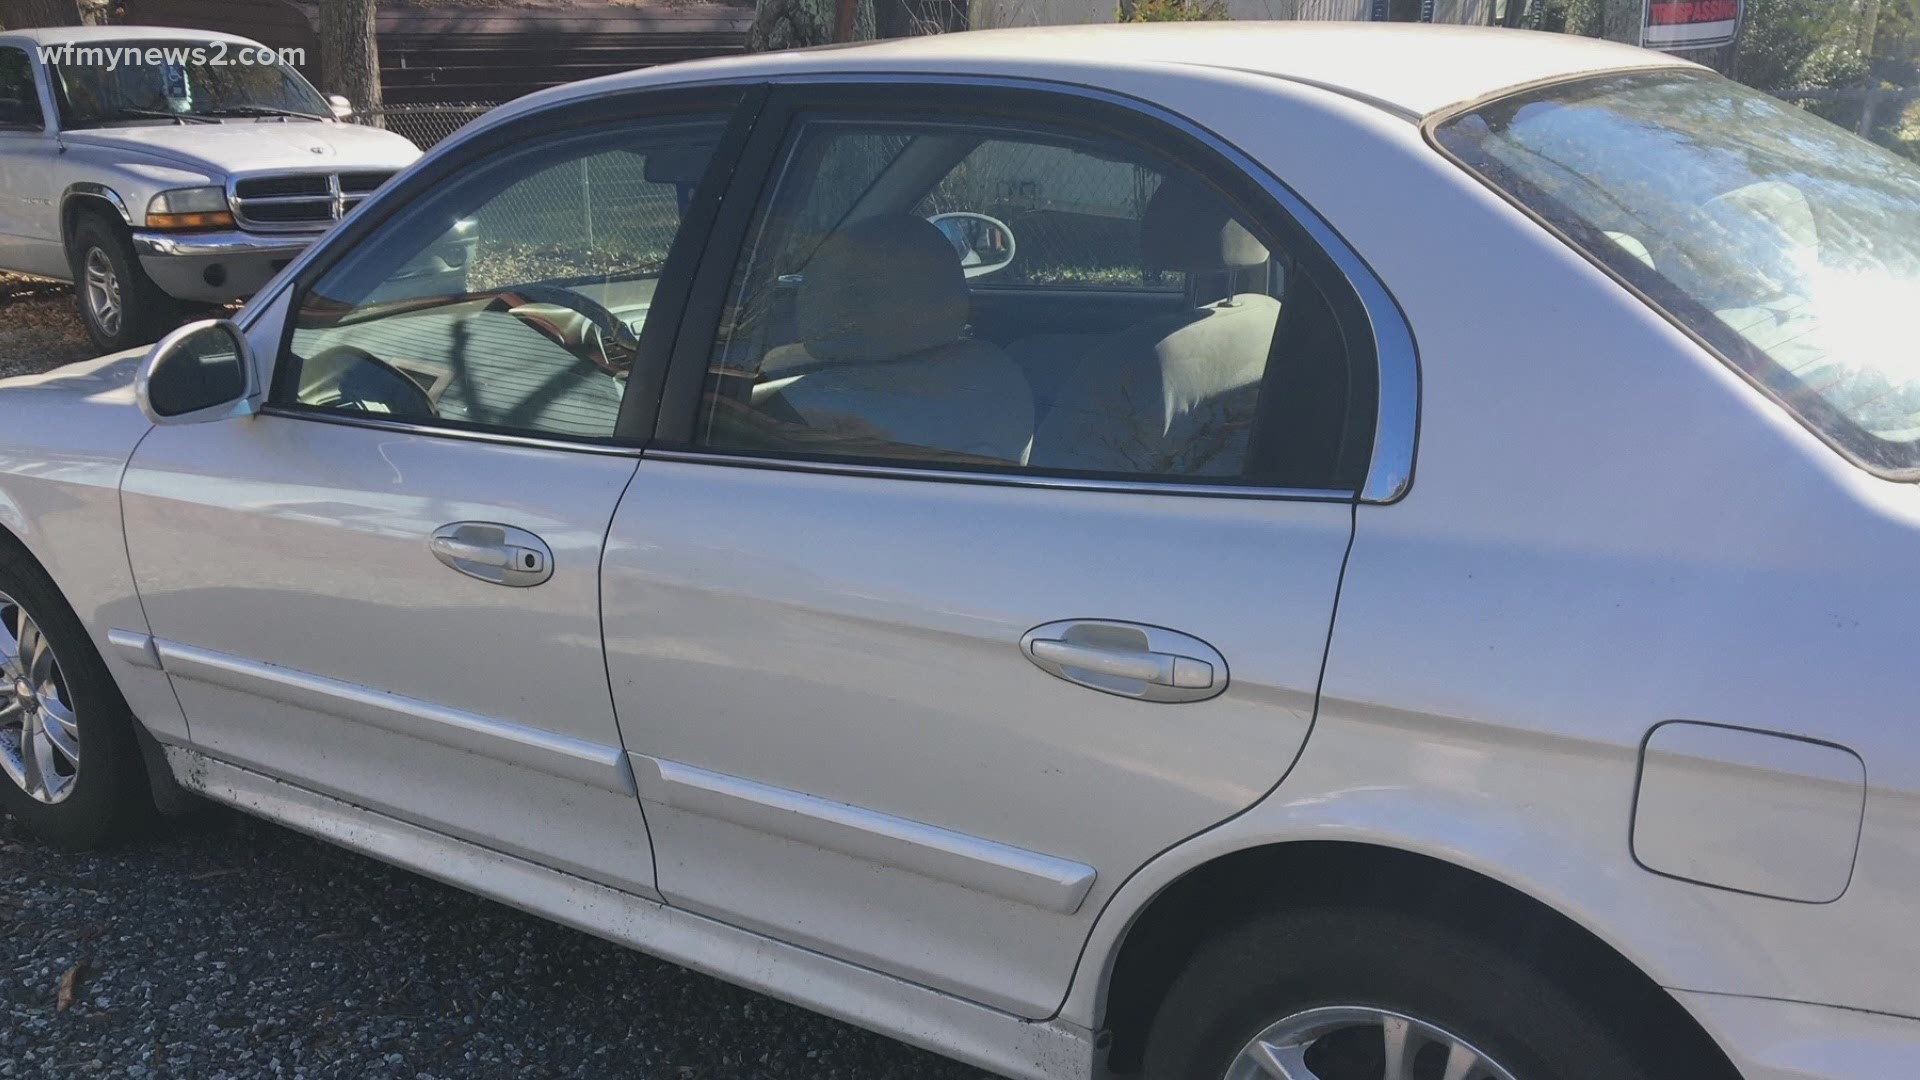 It seemed like the car would never be repaired. It just sat in the same spot at the dealership not moving. Then it broke down after more than $1,500 in repairs.